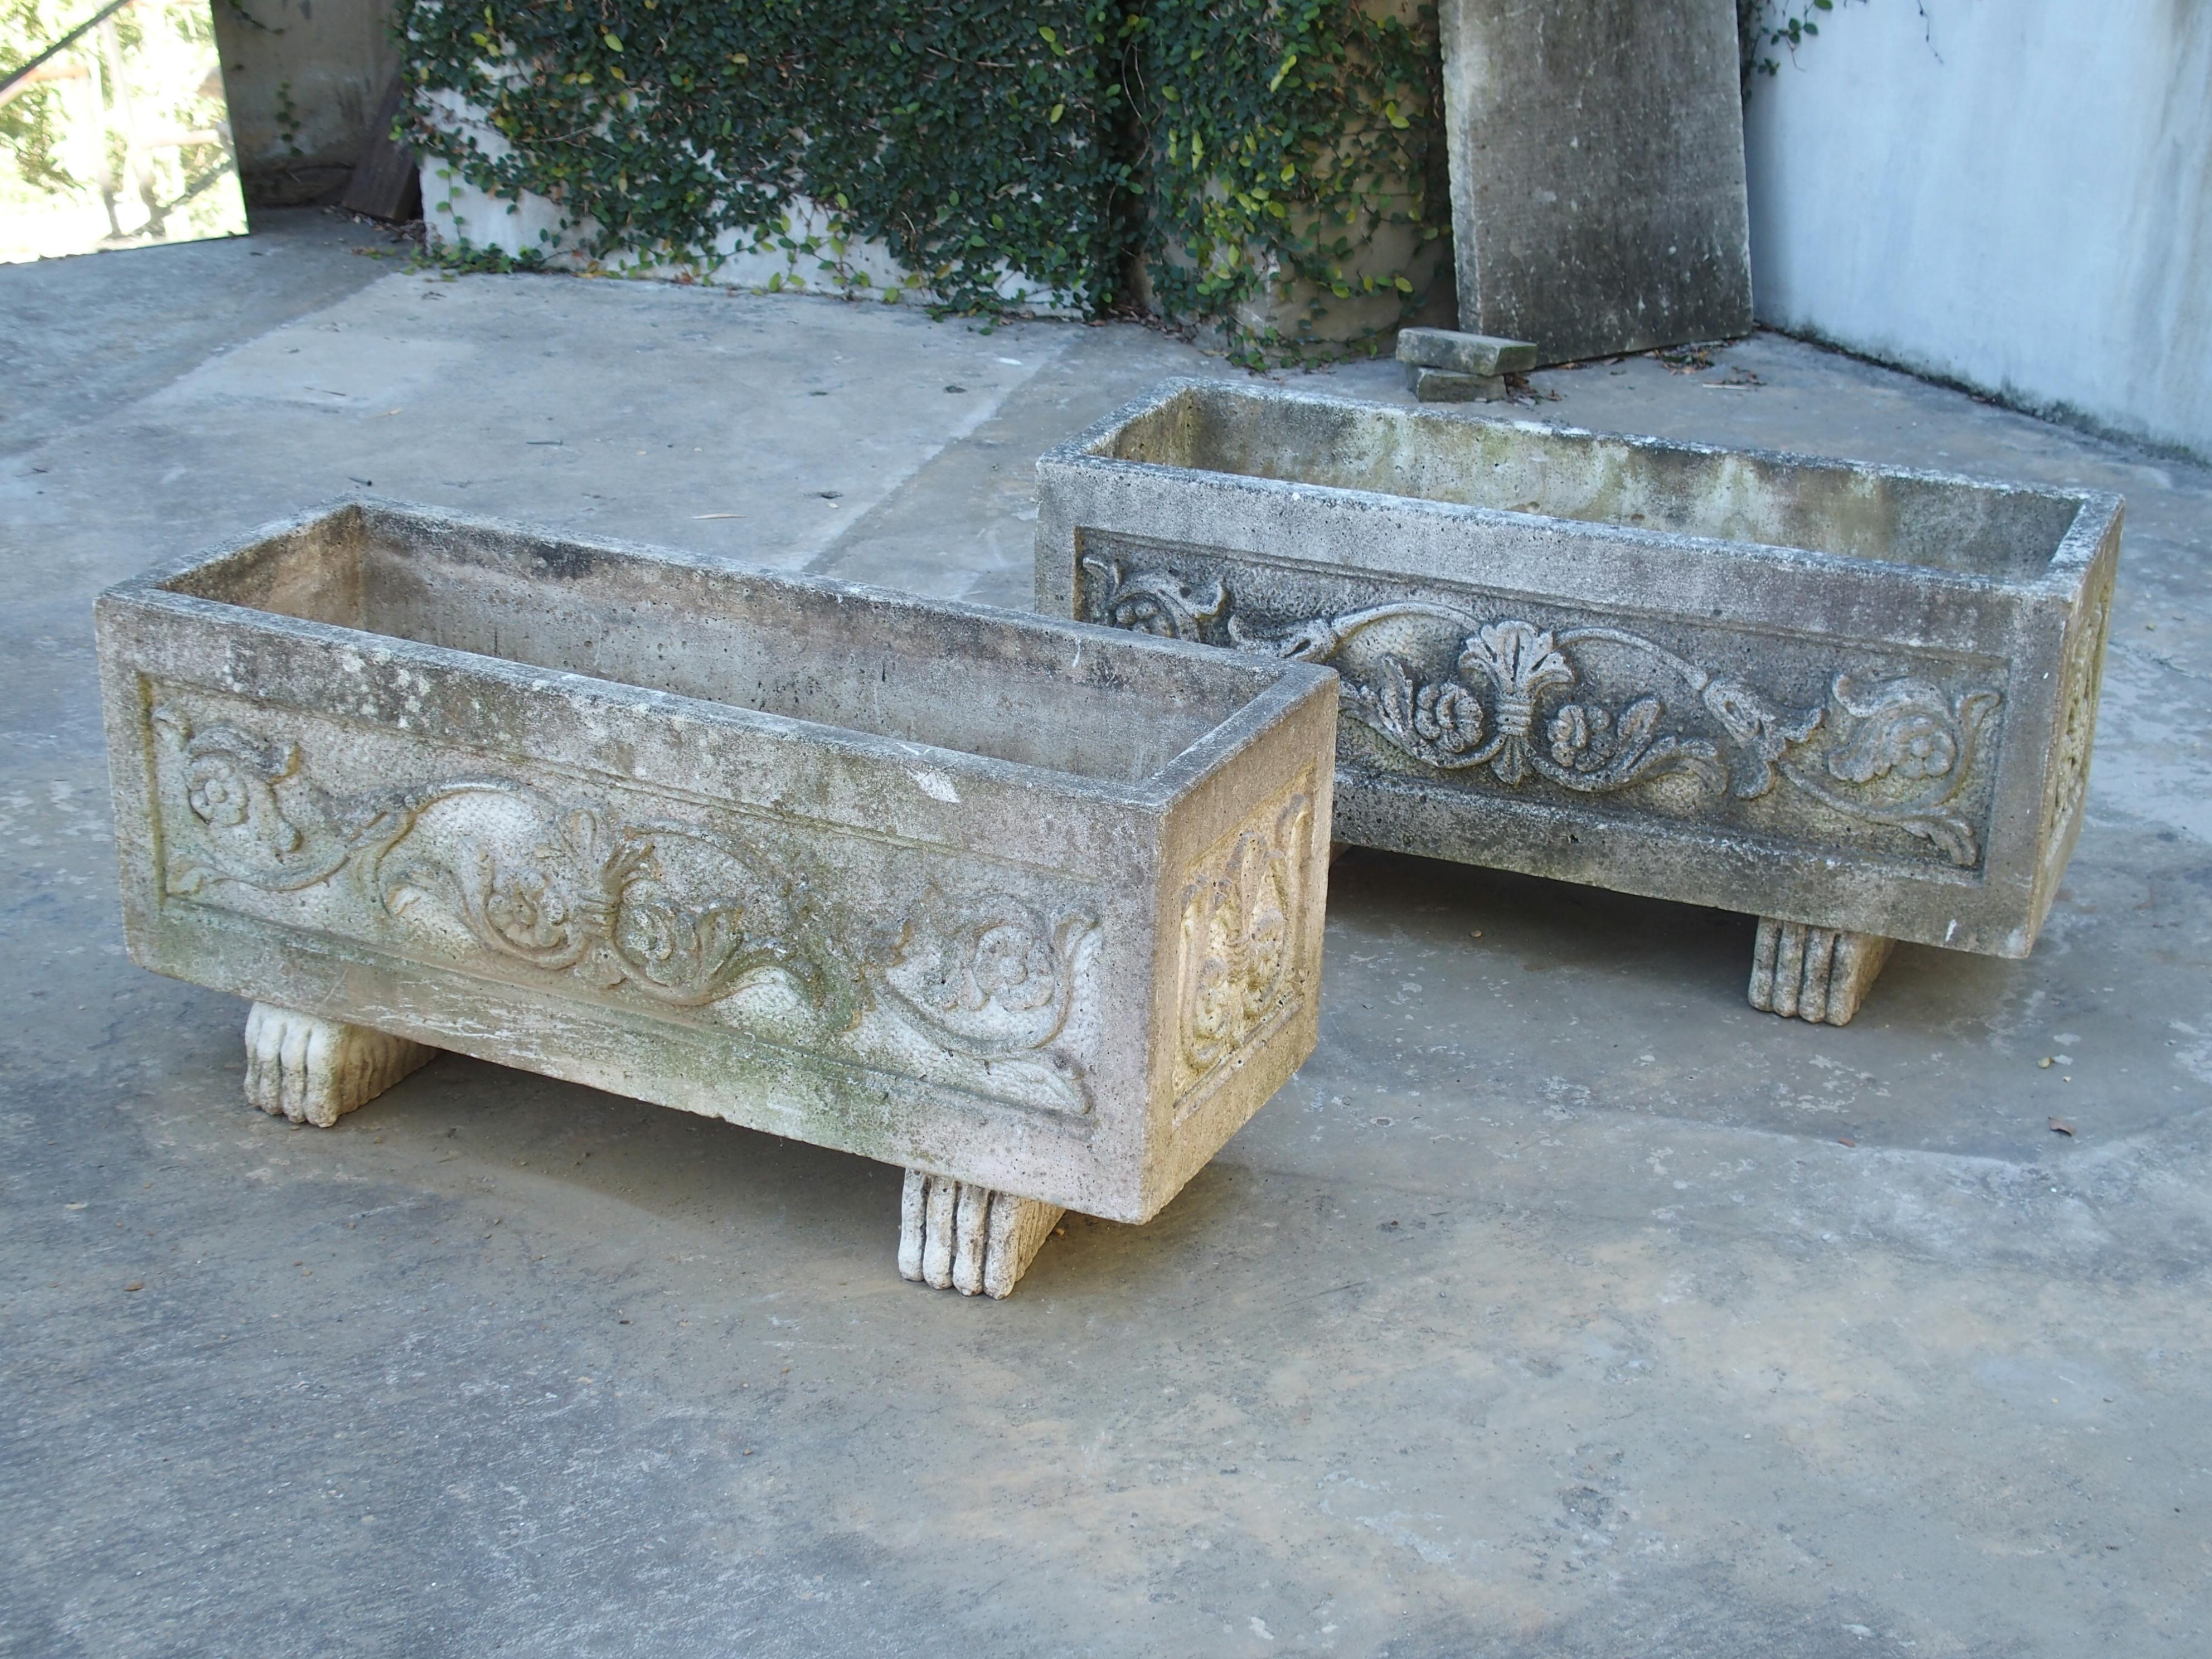 20th Century Pair of Decorative Cast Garden Planters from France